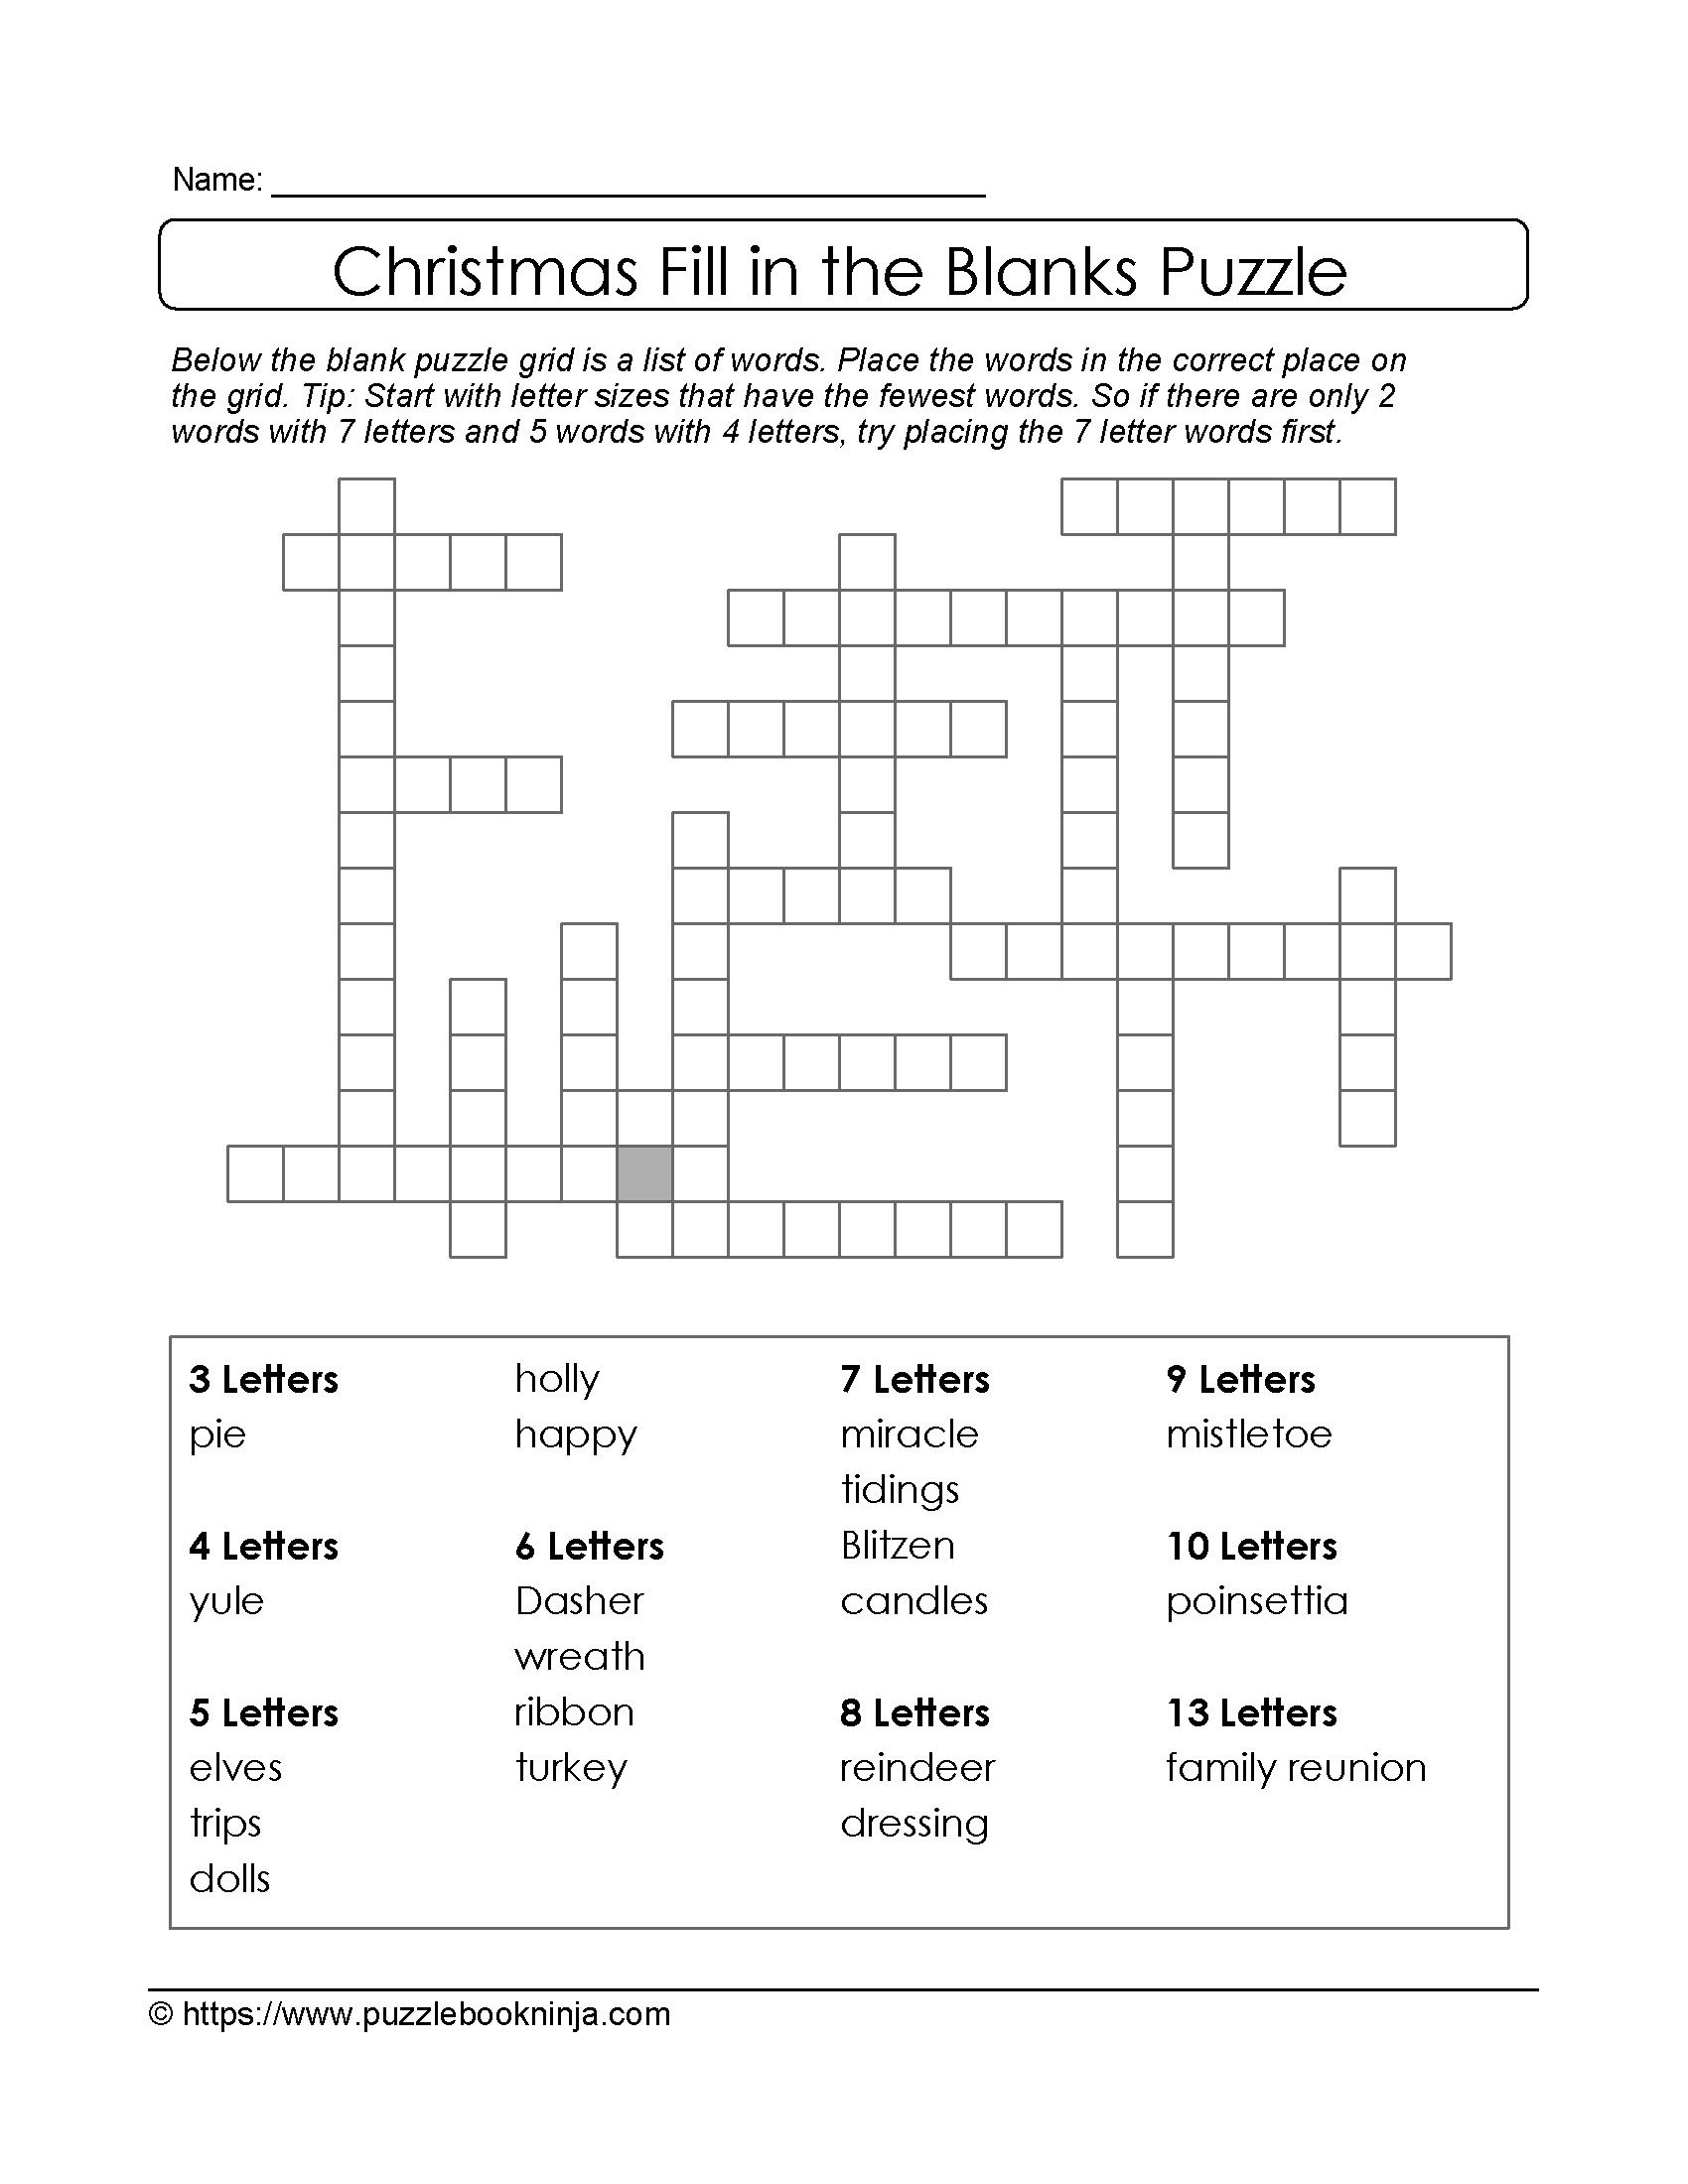 Puzzles To Print. Downloadable Christmas Puzzle. | Christmas Puzzles - Printable Science Puzzles